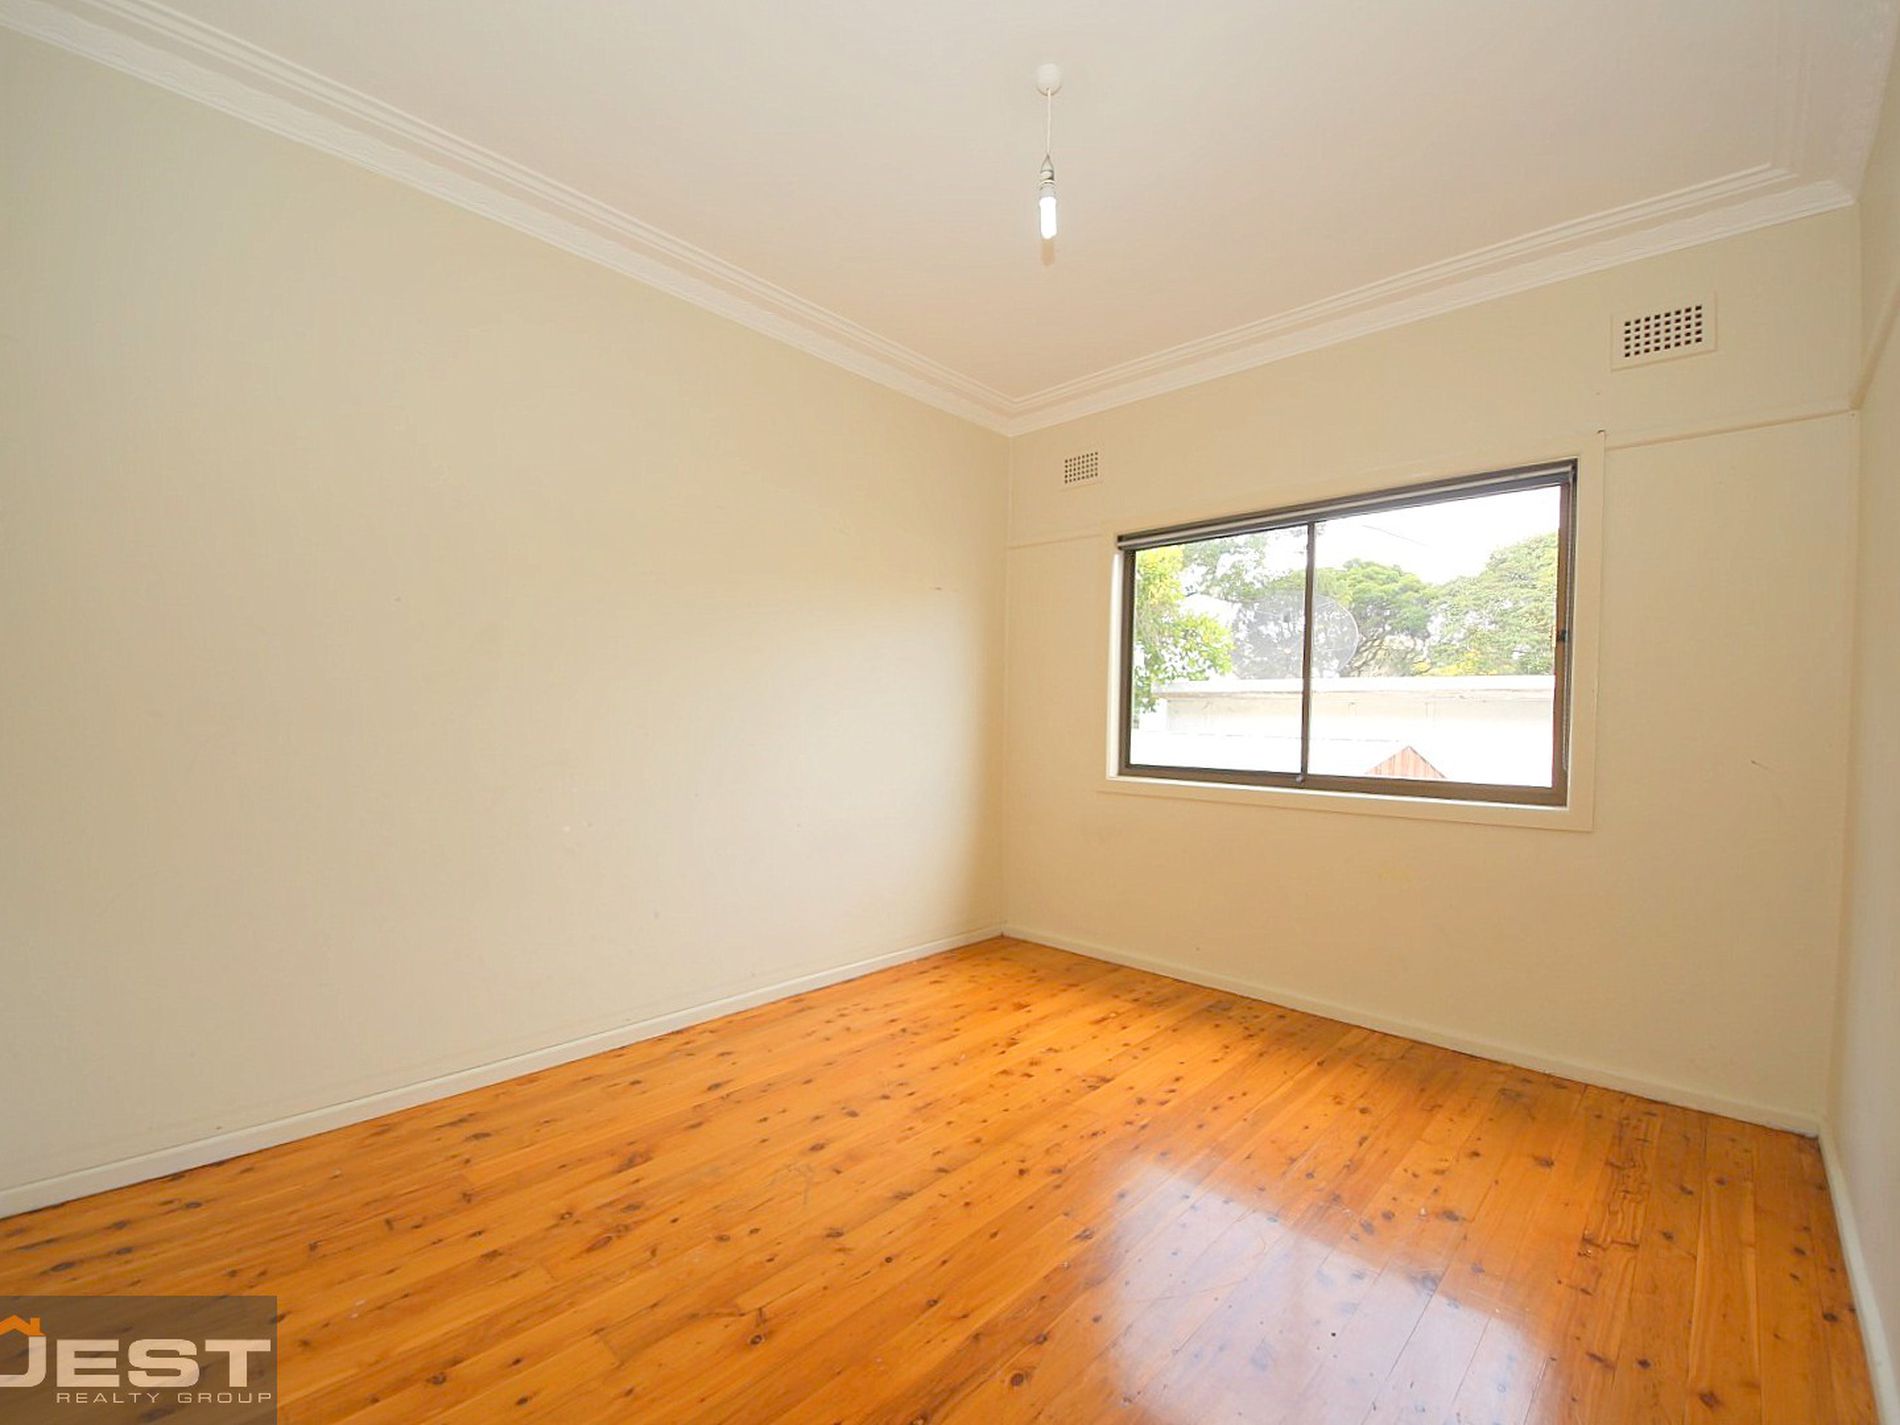 260 Canterbury Road, Revesby